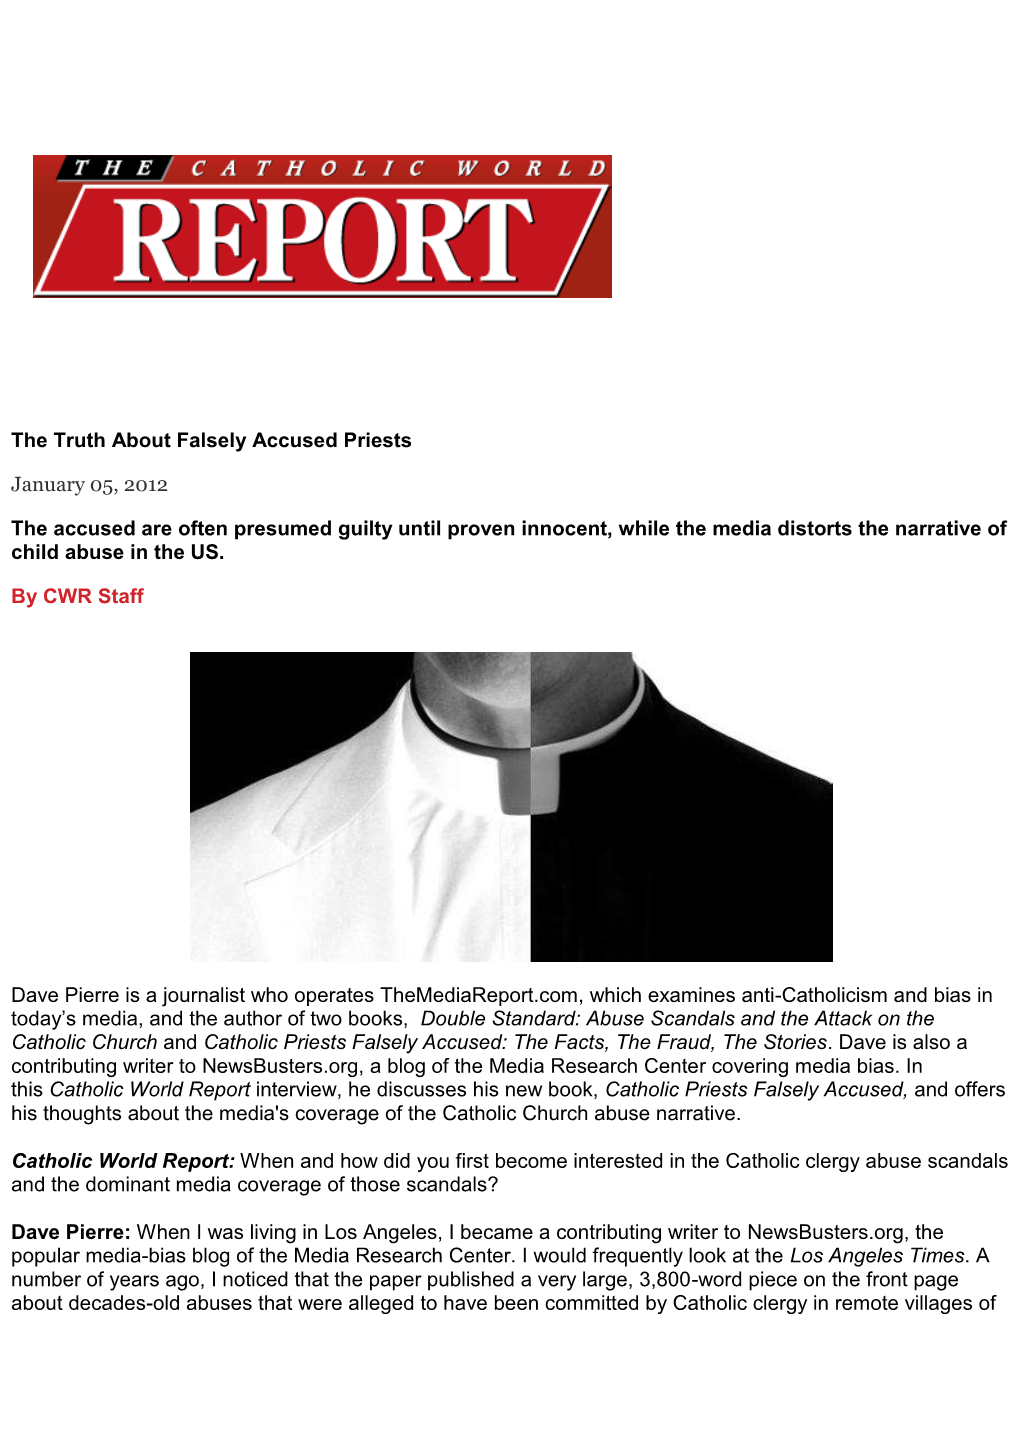 Interview the Truth About Falsely Accused Priests January 05, 2012